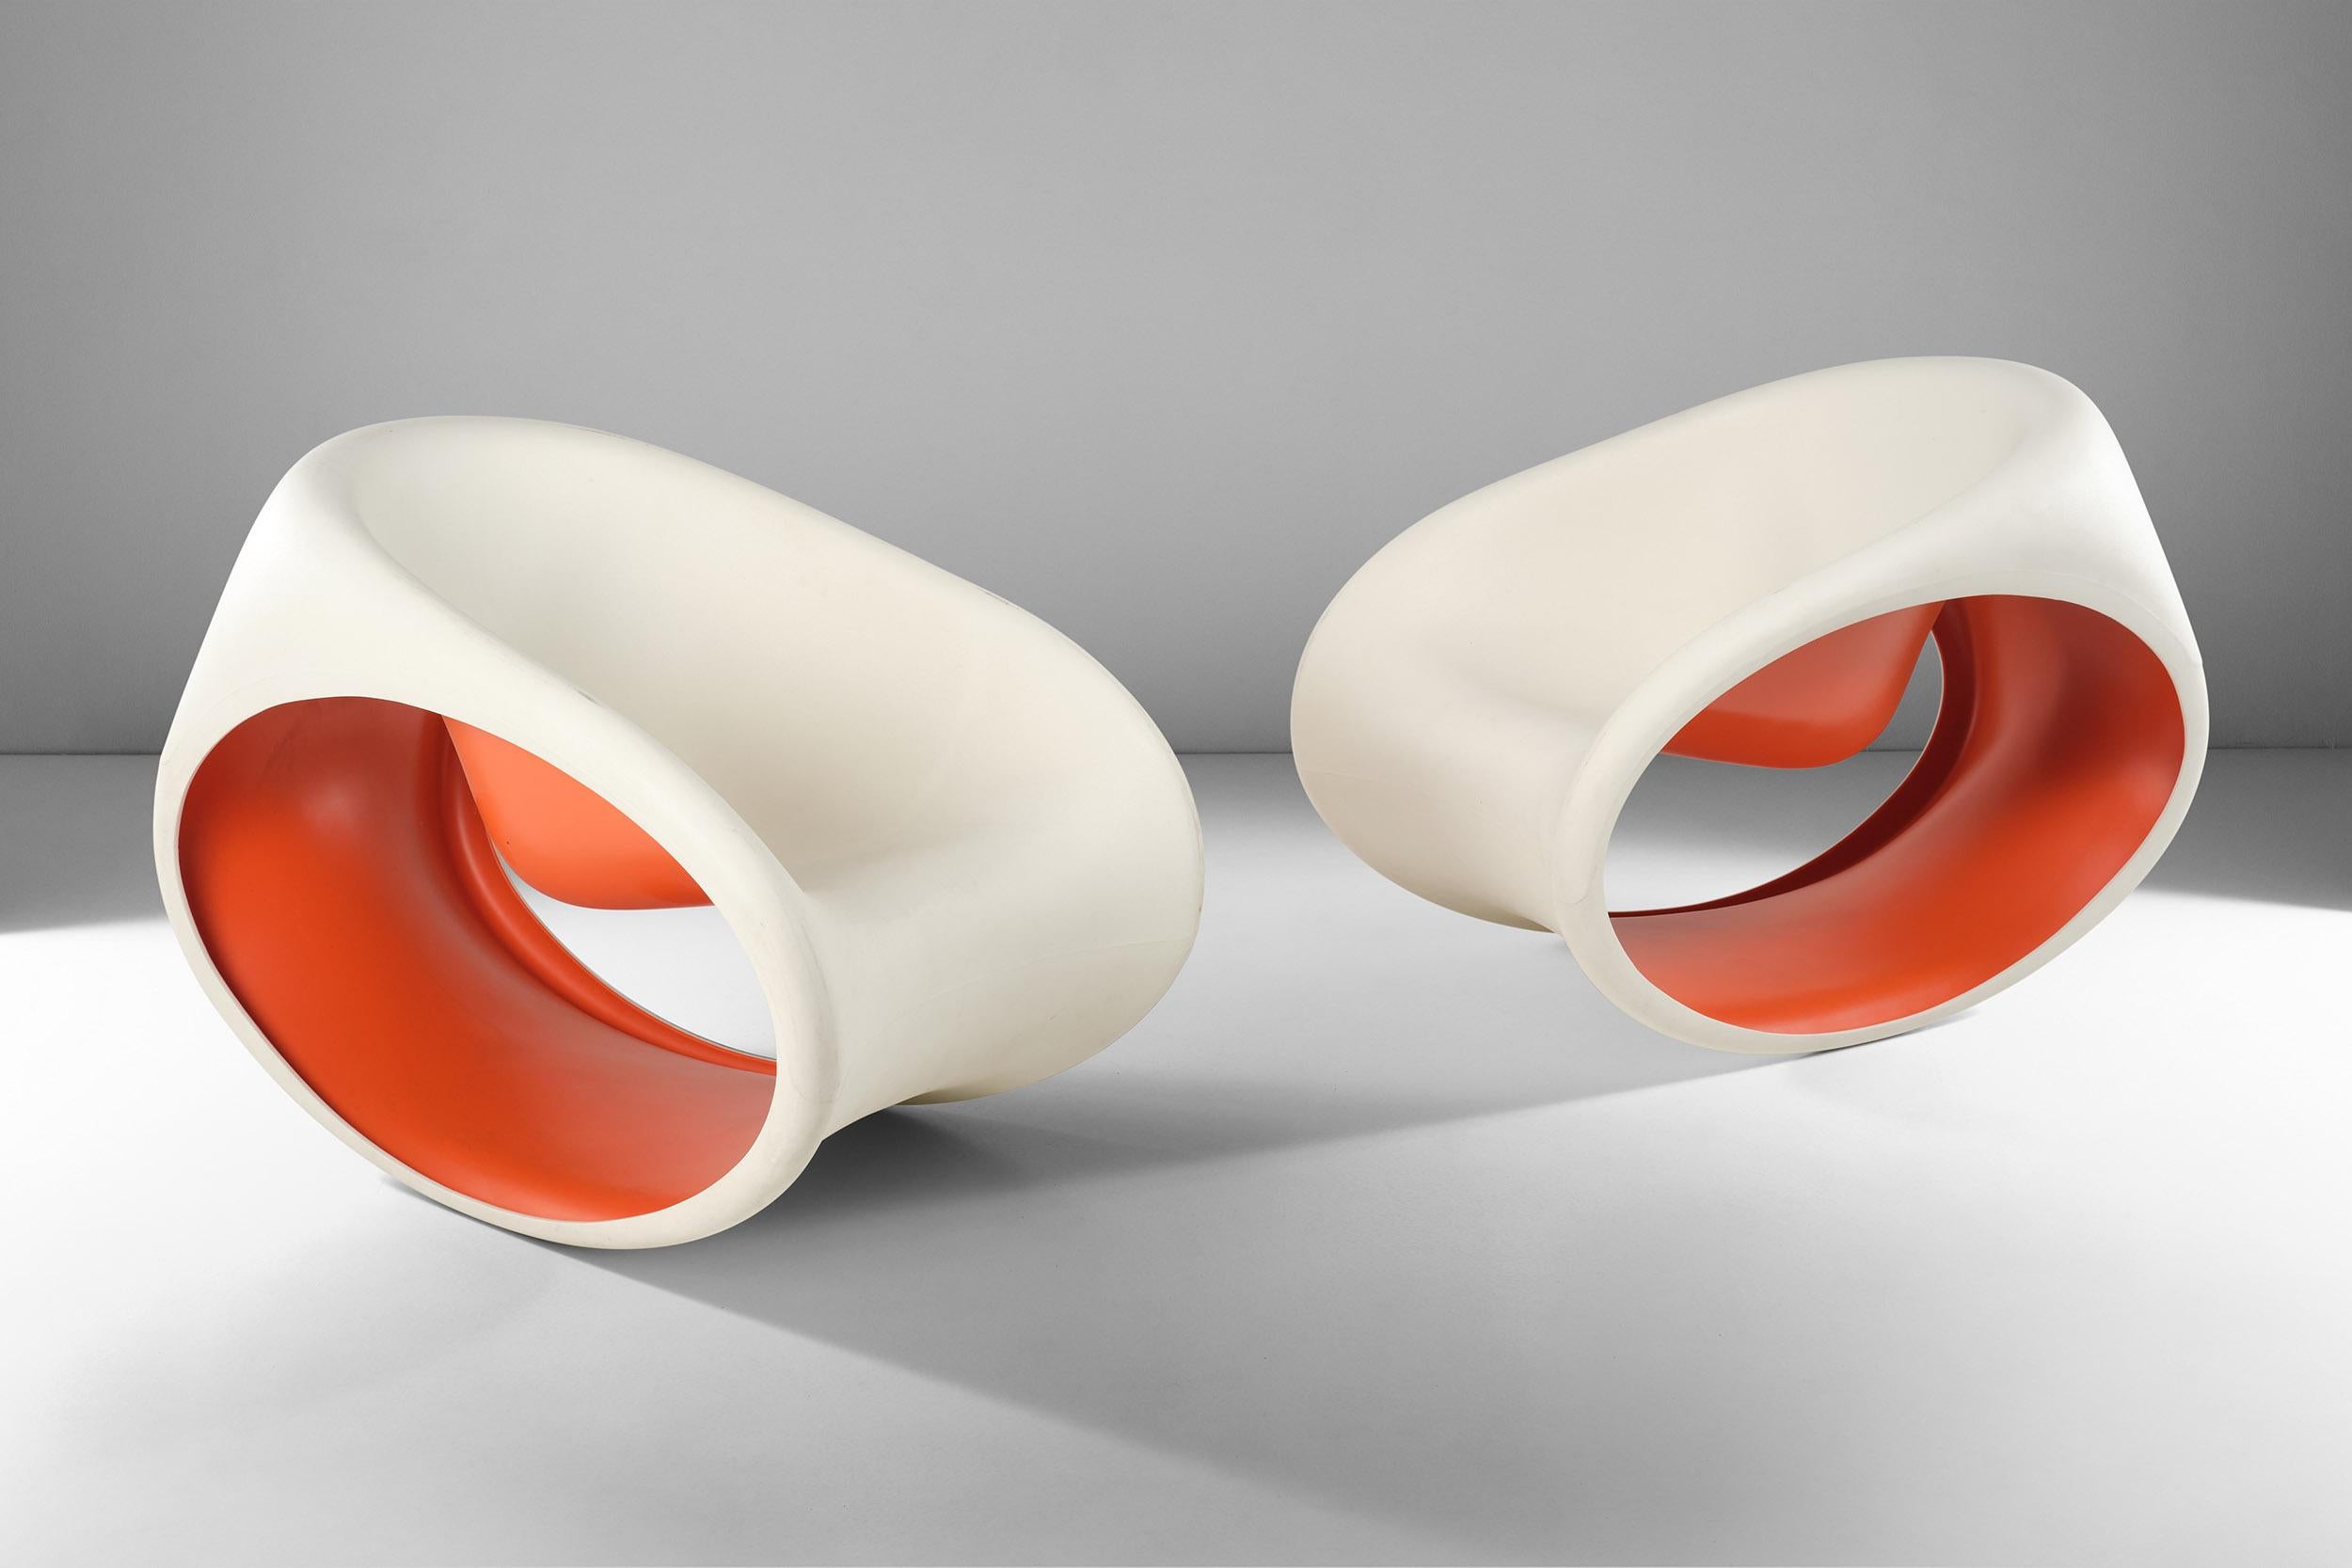 These MT3 rocking chairs were design by Ron Arad for Driade and made of a monobloc rotational moulding polyethylene in sand white coloured outside and red coloured inside. 
Characterized by its smooth shape and sleek design, its base allows for